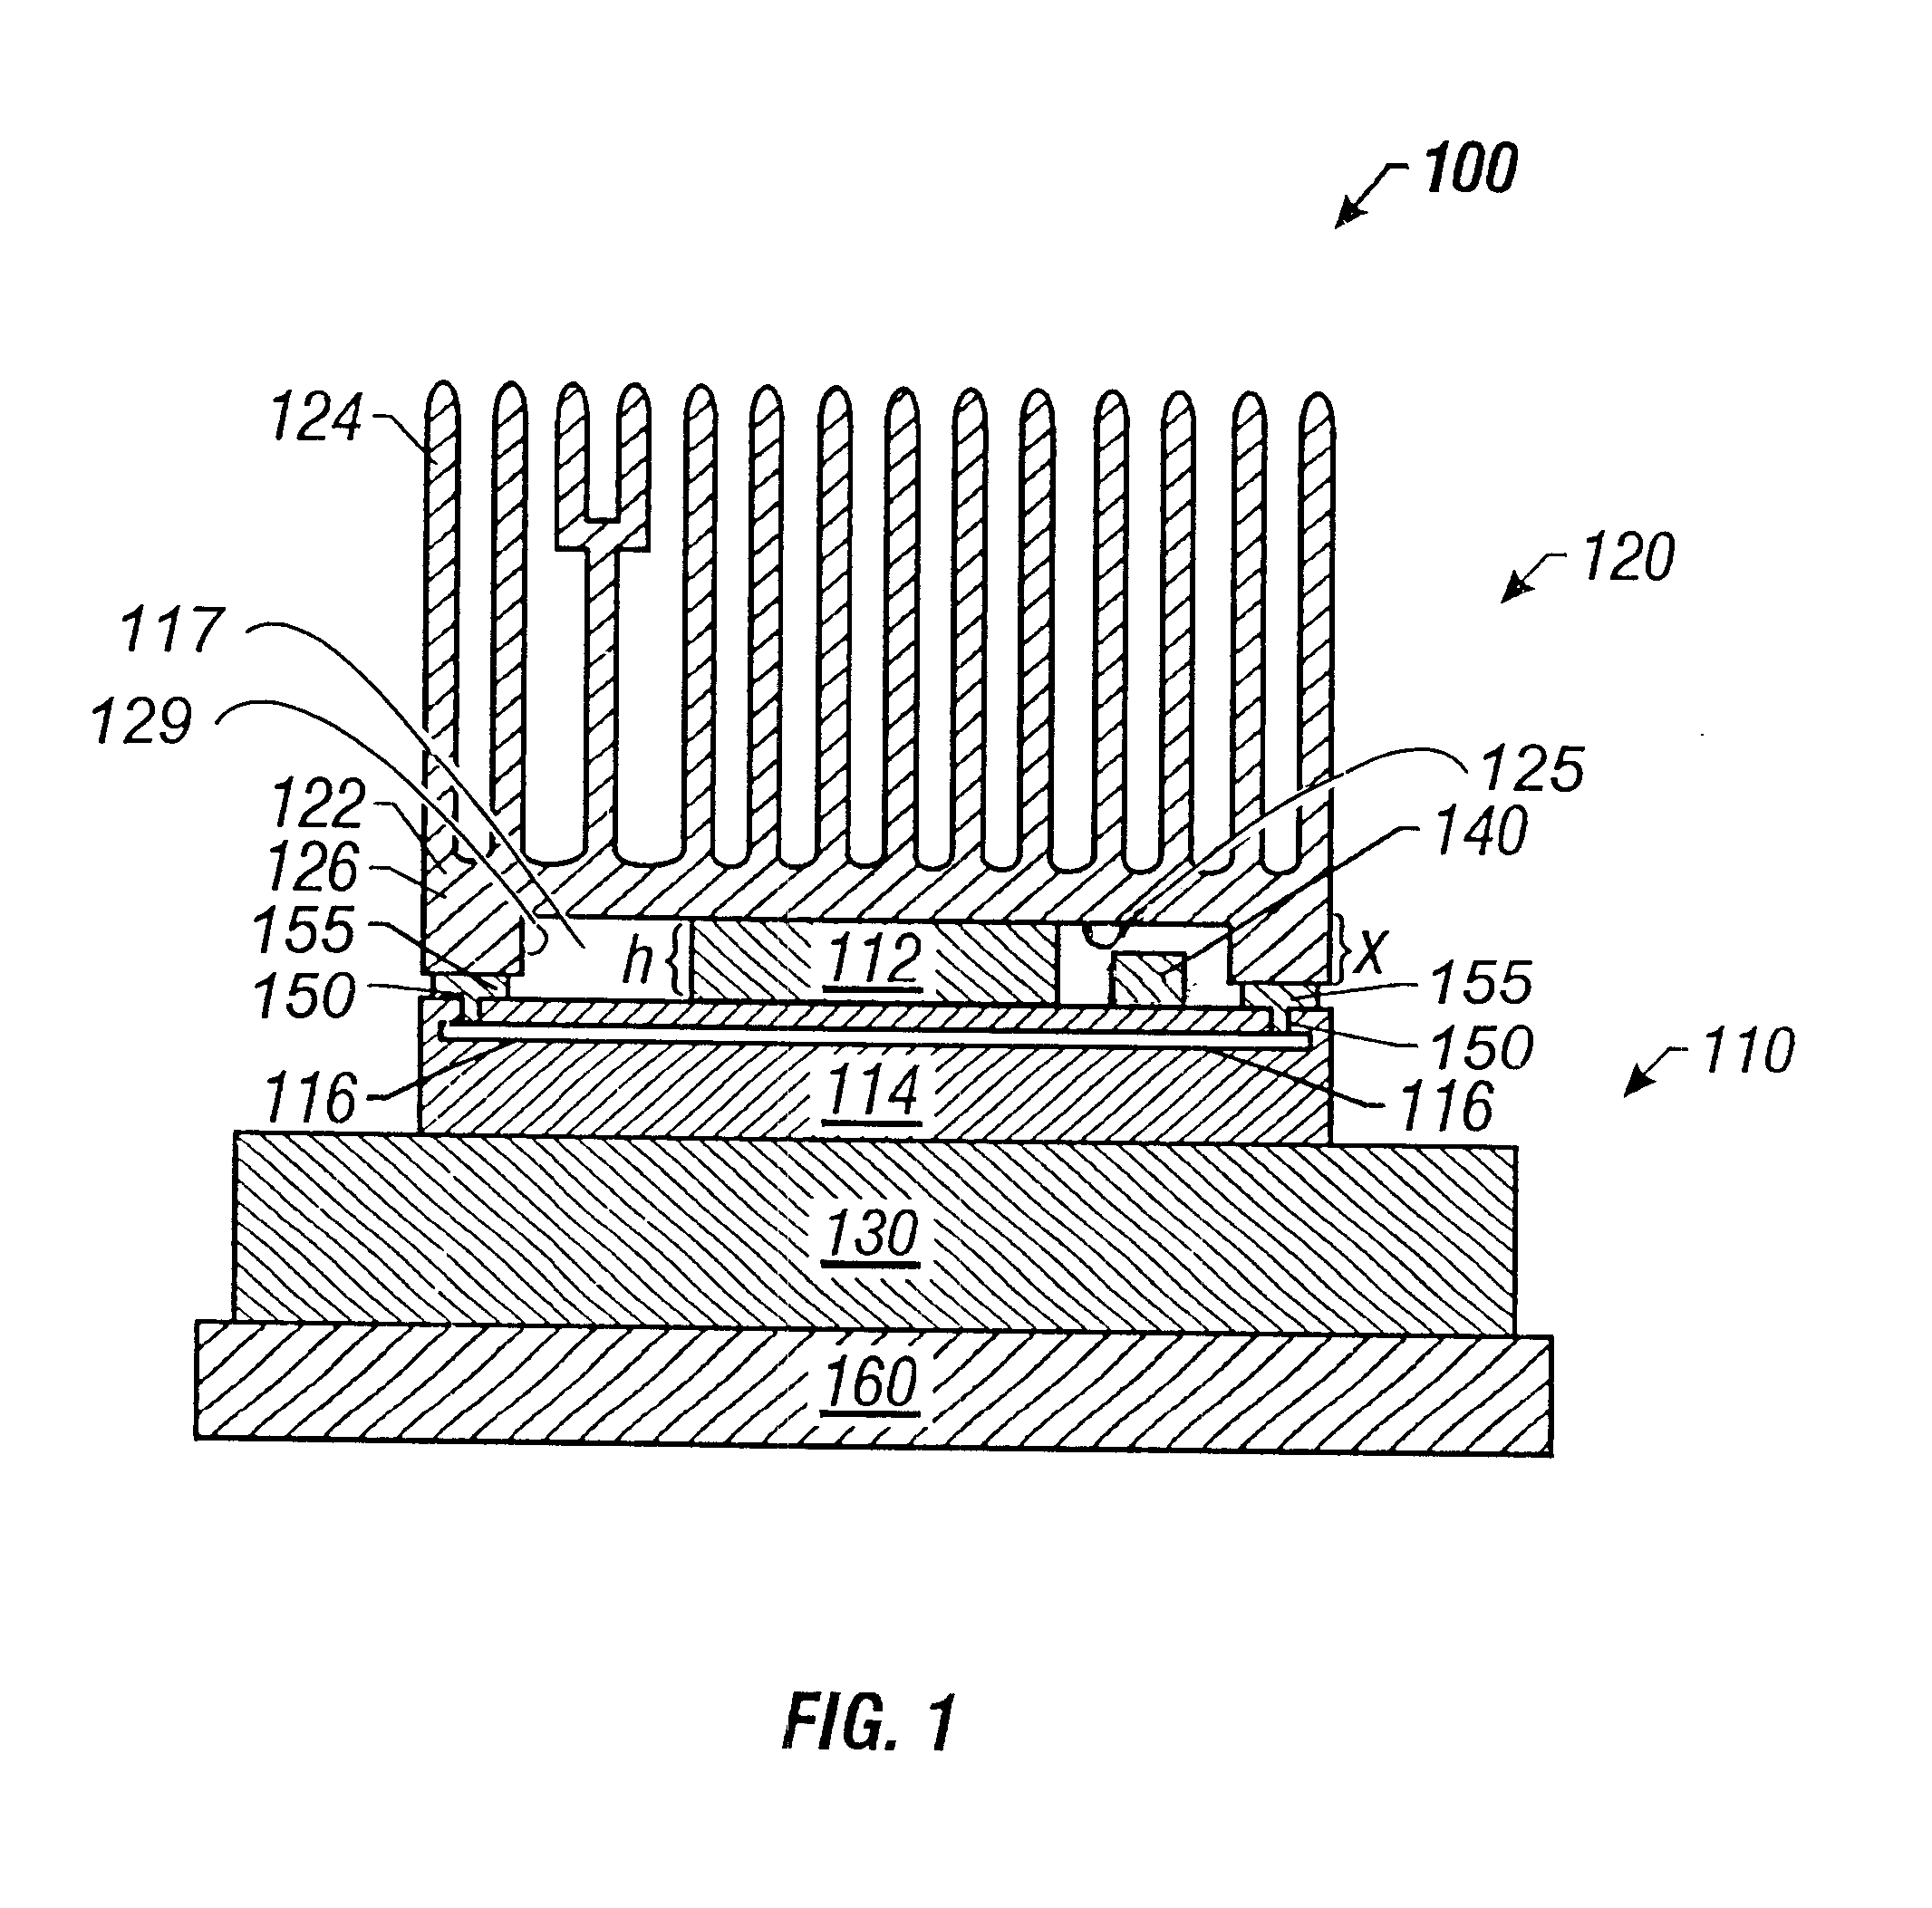 Method and apparatus for shielding electromagnetic emissions from an integrated circuit